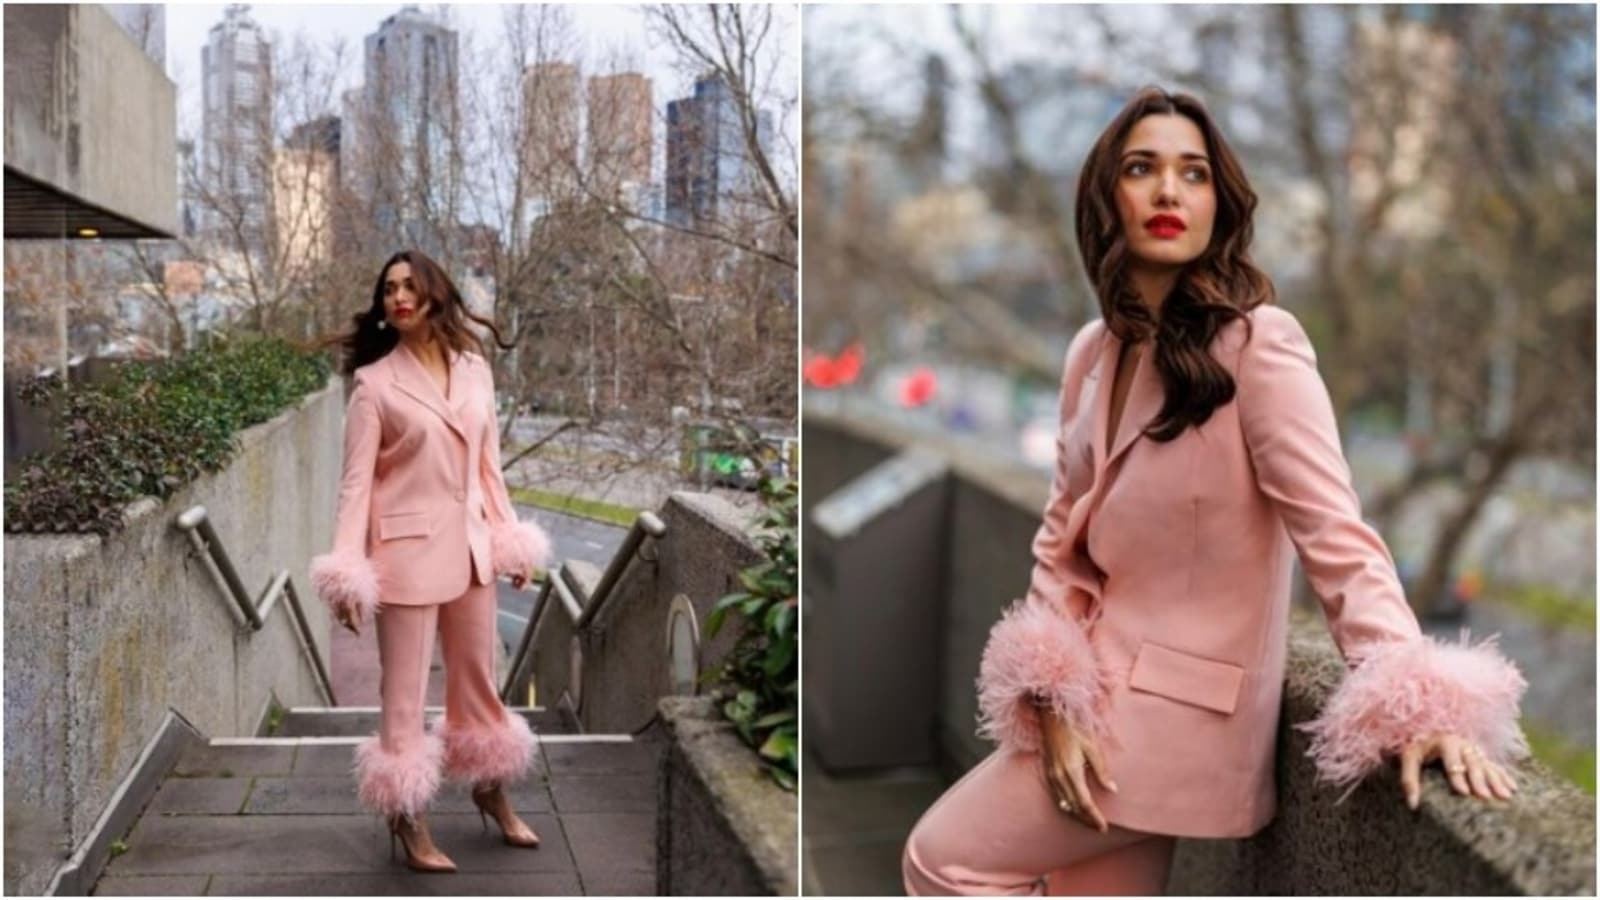 Tamannaah Bhatia is ‘missing Melbourne’ in this stunning pink attire